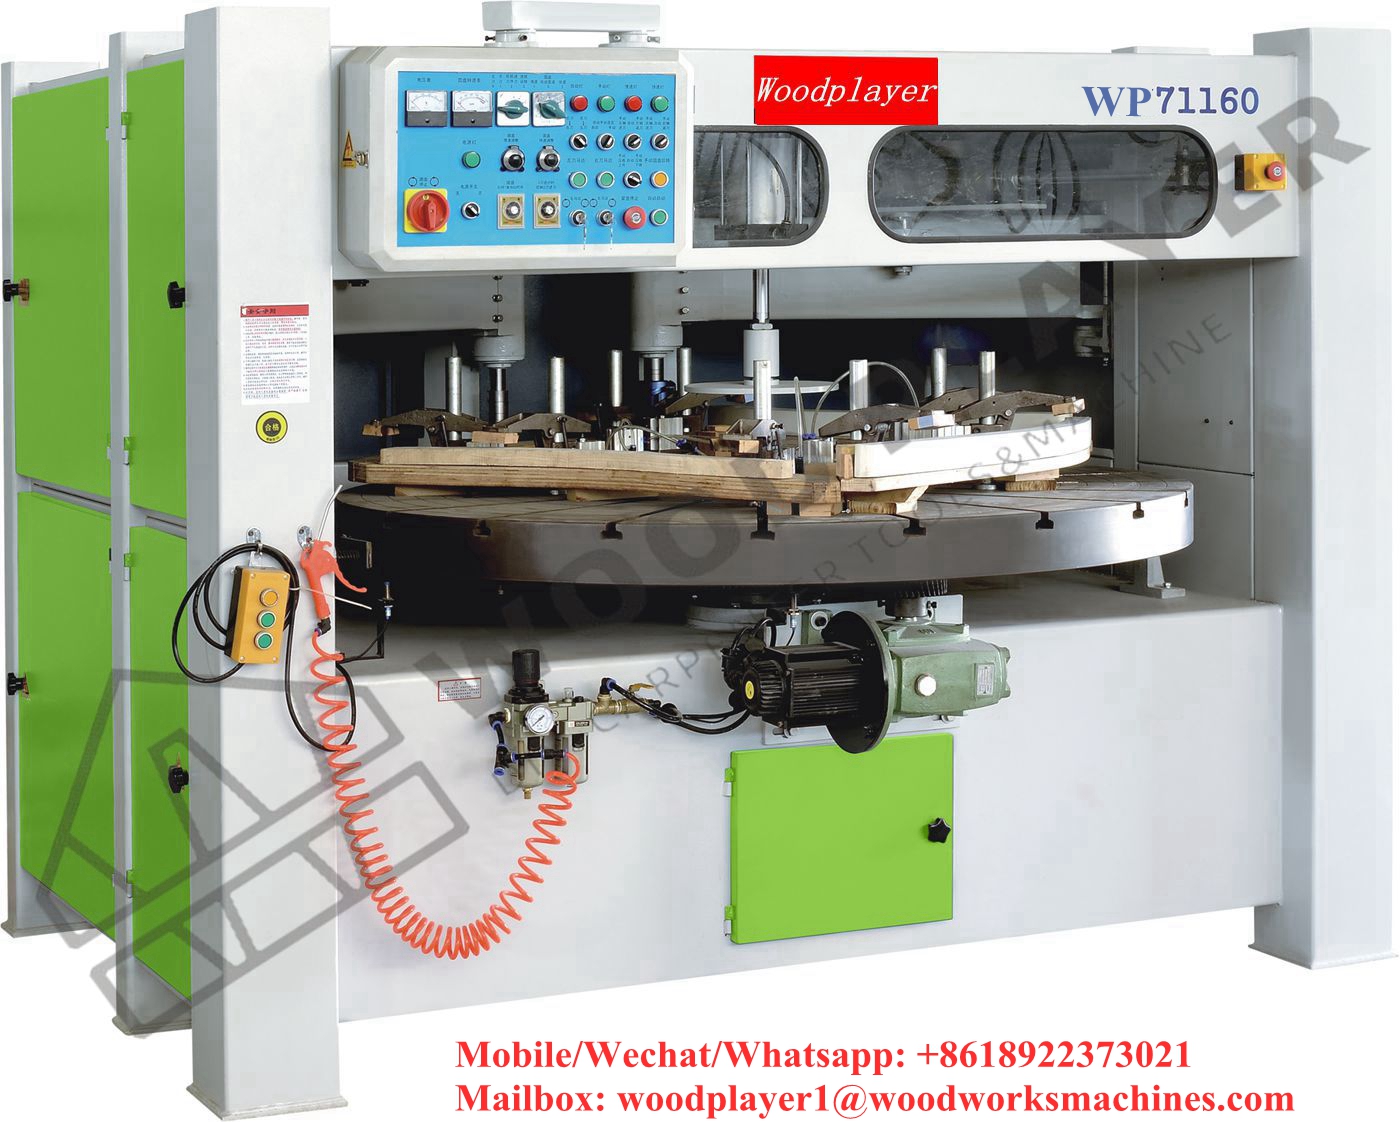 WP71160/WP71180 Twin Spindles Auto Copy Shaper Large Table Processing Equipment Multi-Functional Automatic Profiling Milling Machine Woodworking Machine